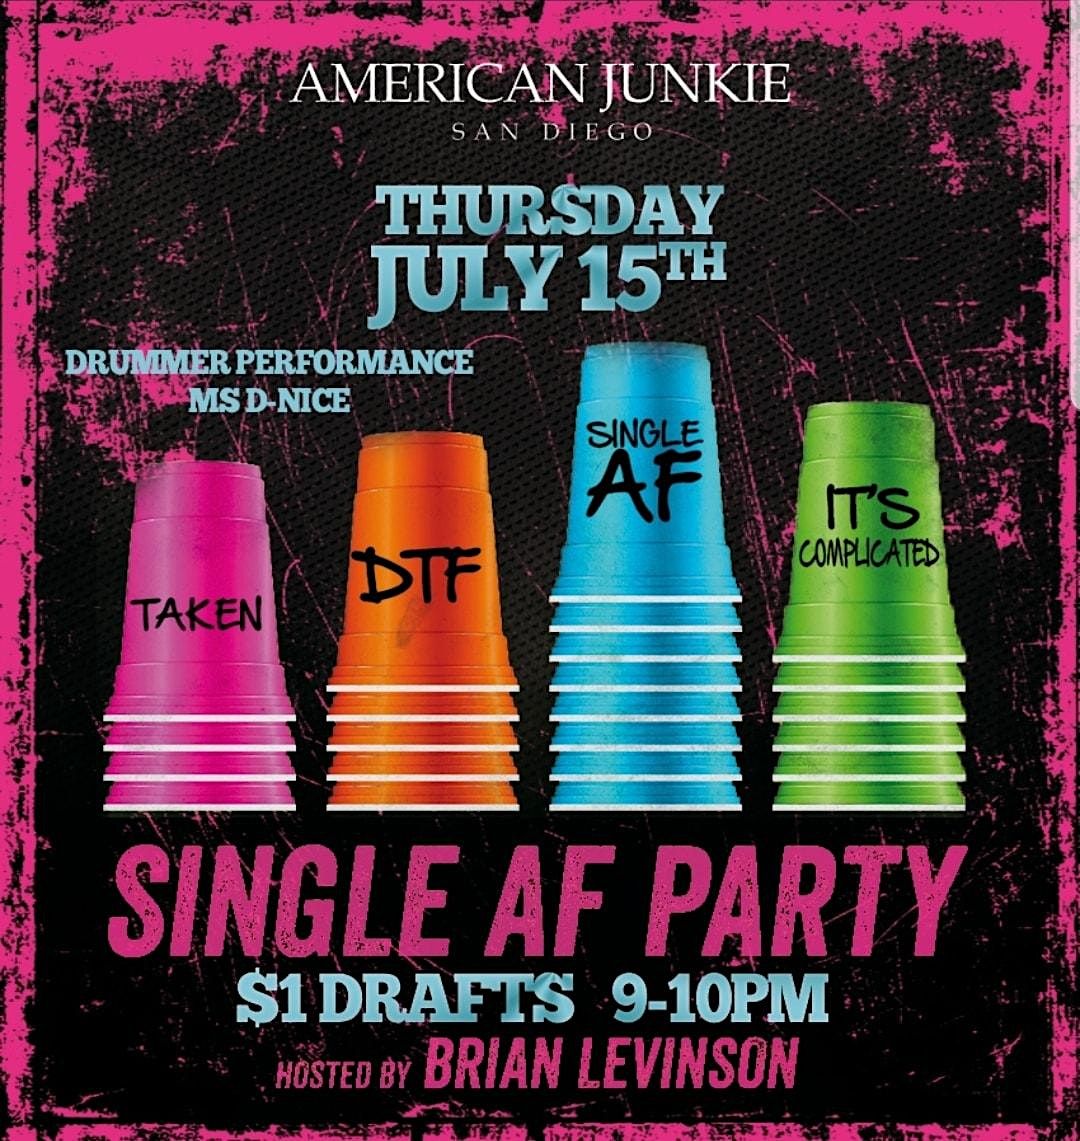 Single AF Glow Party - American Junkie Thursday